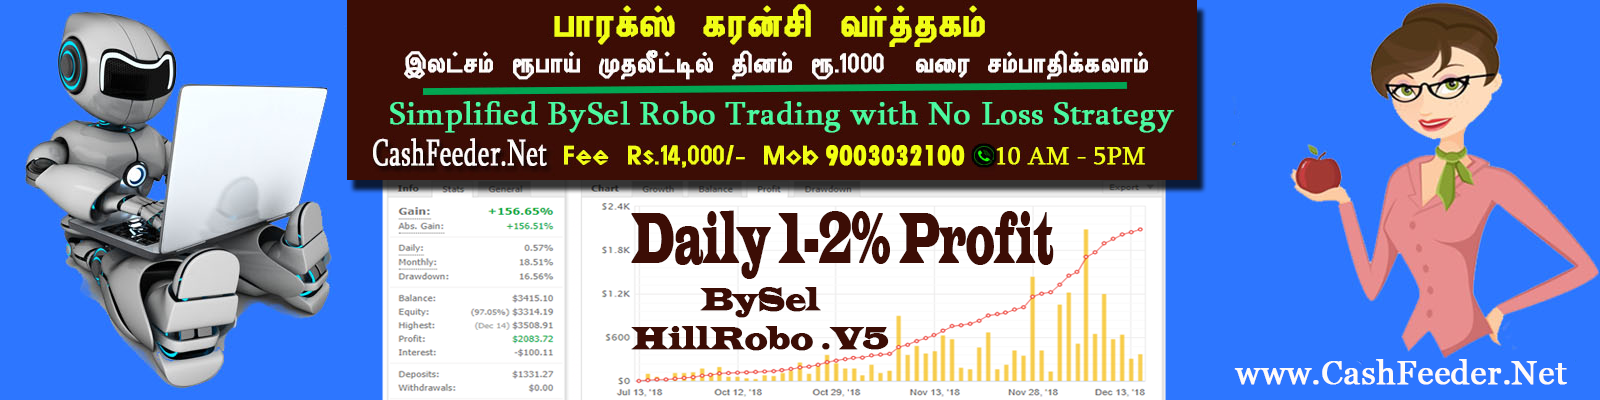 Forex trading training in tamil